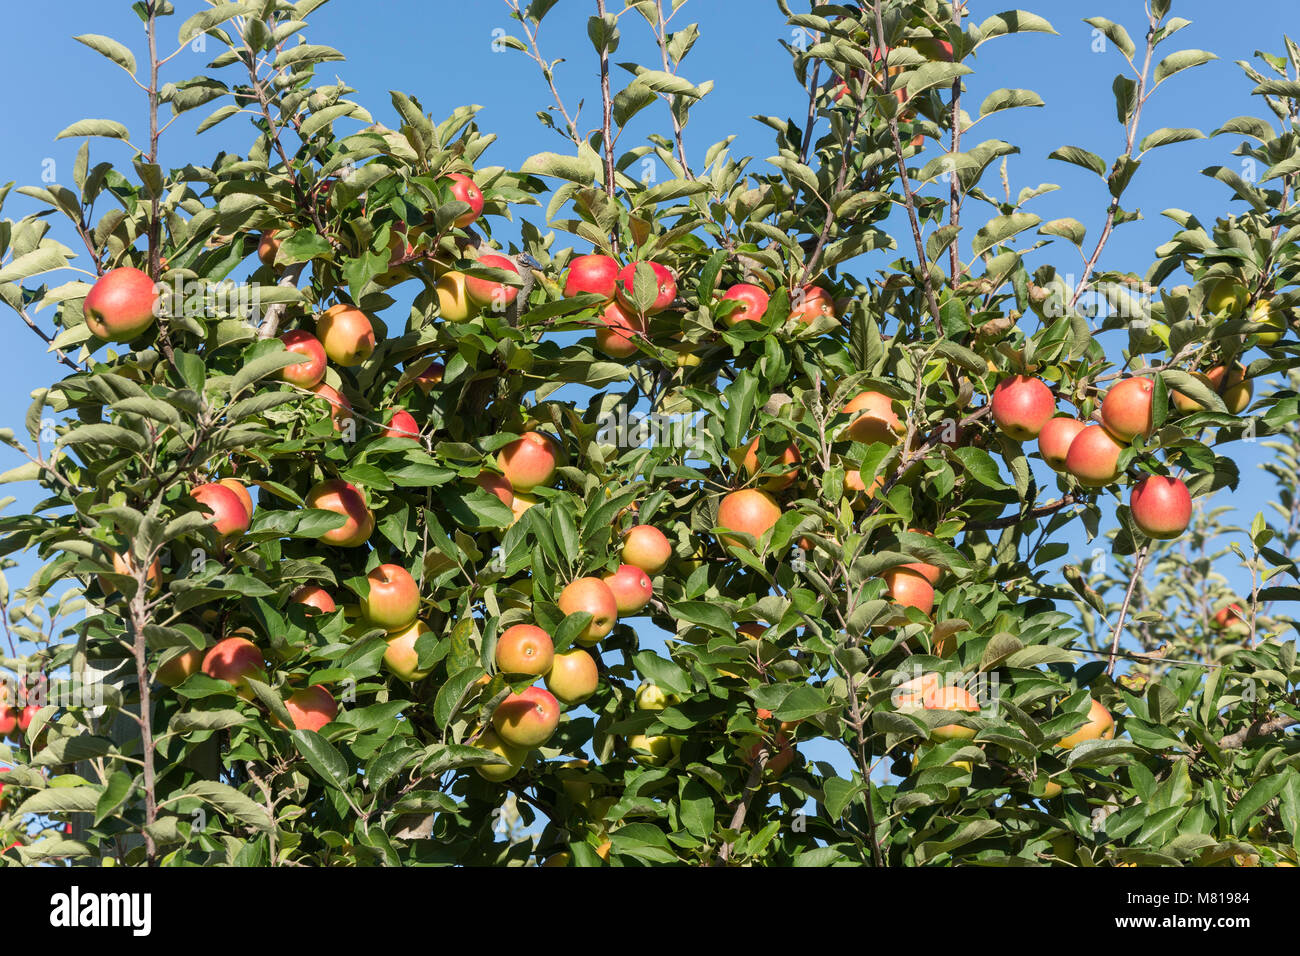 Apple tree in orchard, Lower Moutere, Tasman District, New Zealand Stock Photo